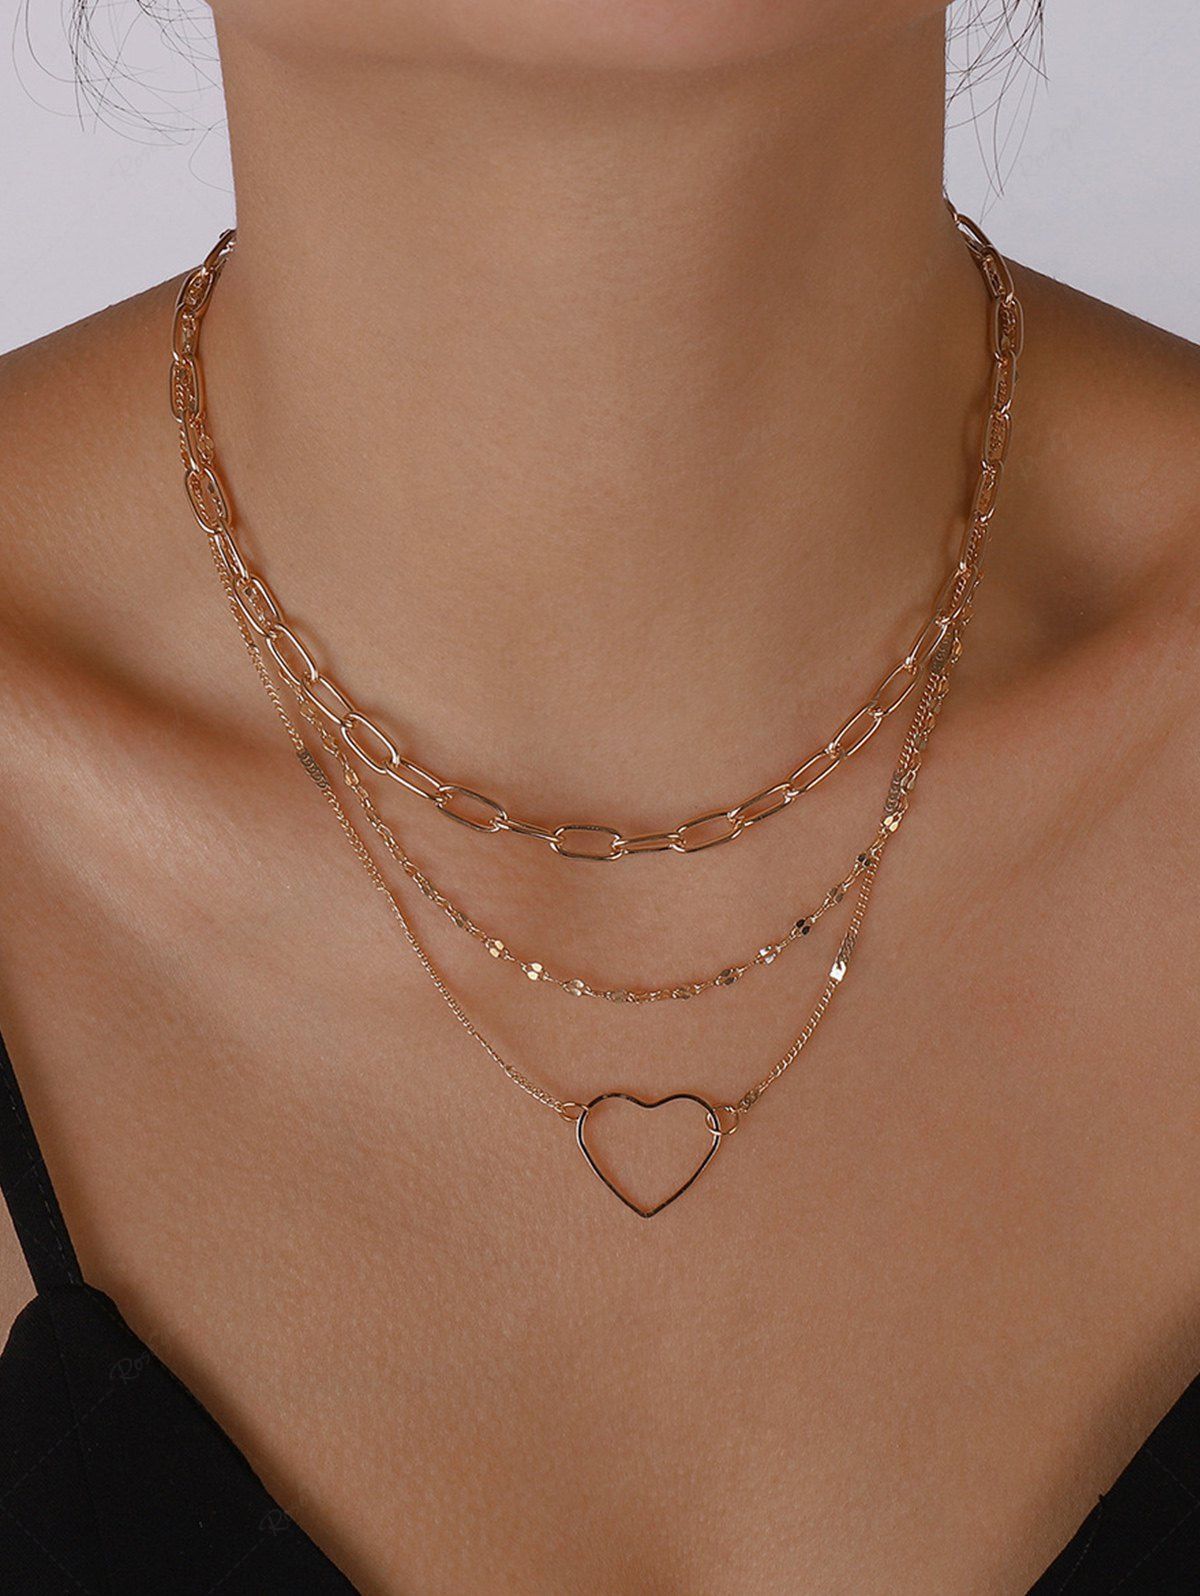 Fancy Layered Hollow Out Heart Pendant Choker Necklace  